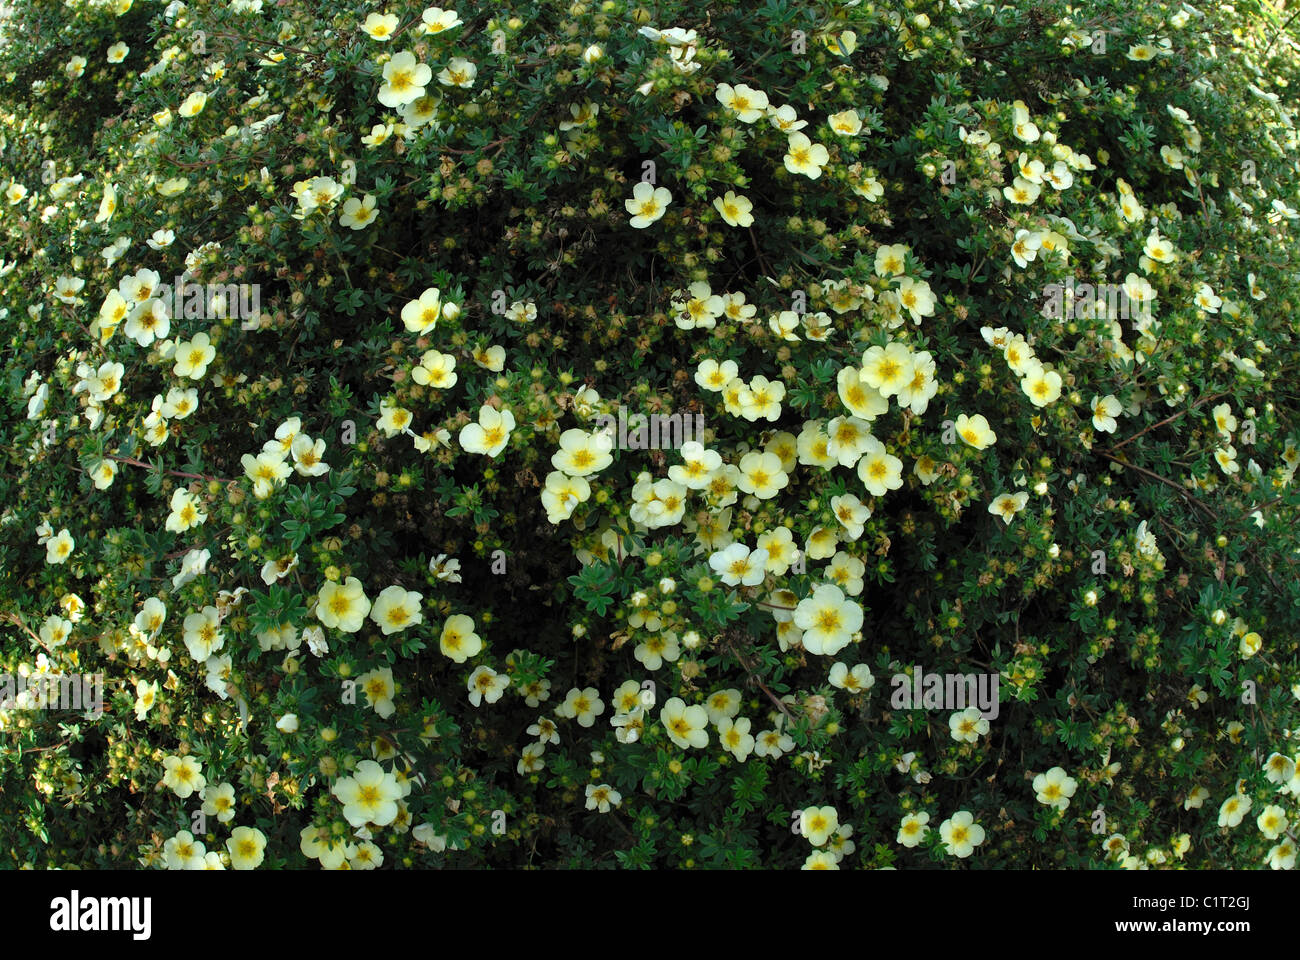 A mass of tiny yellow potentilla flowers suitable for a background or design Stock Photo